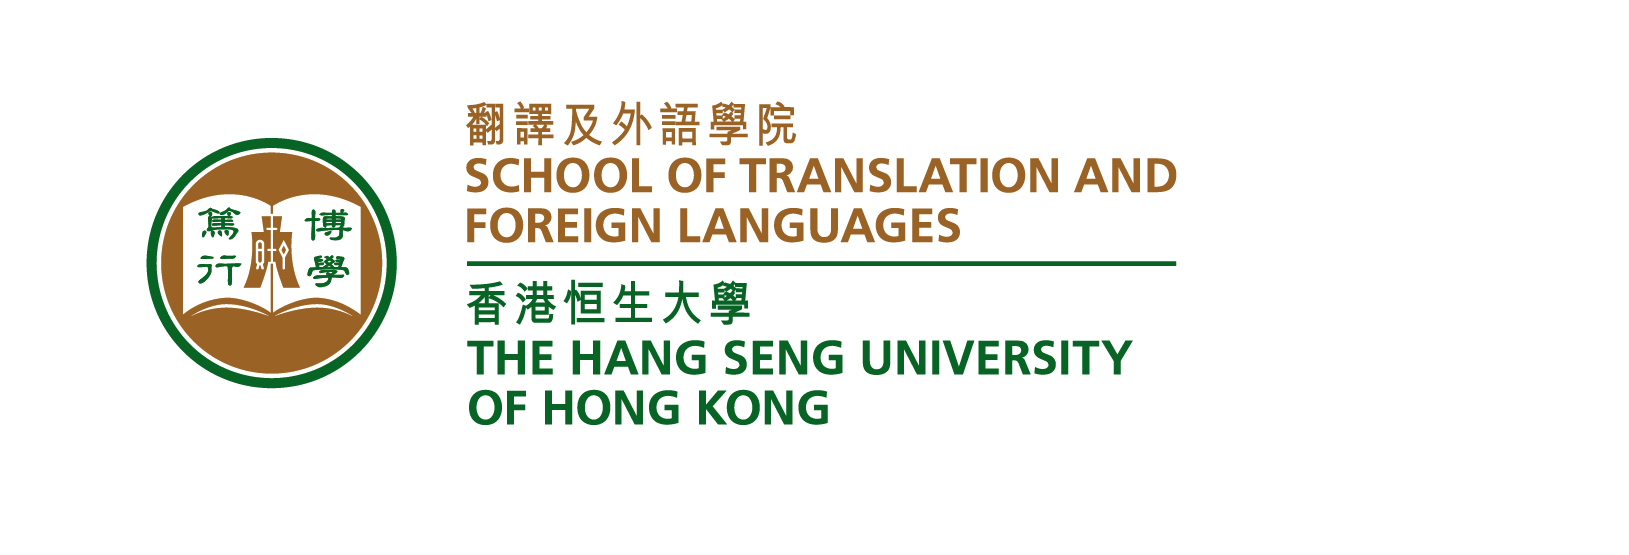 The Hang Seng University of Hong Kong, School of Translation and Foreign Languages